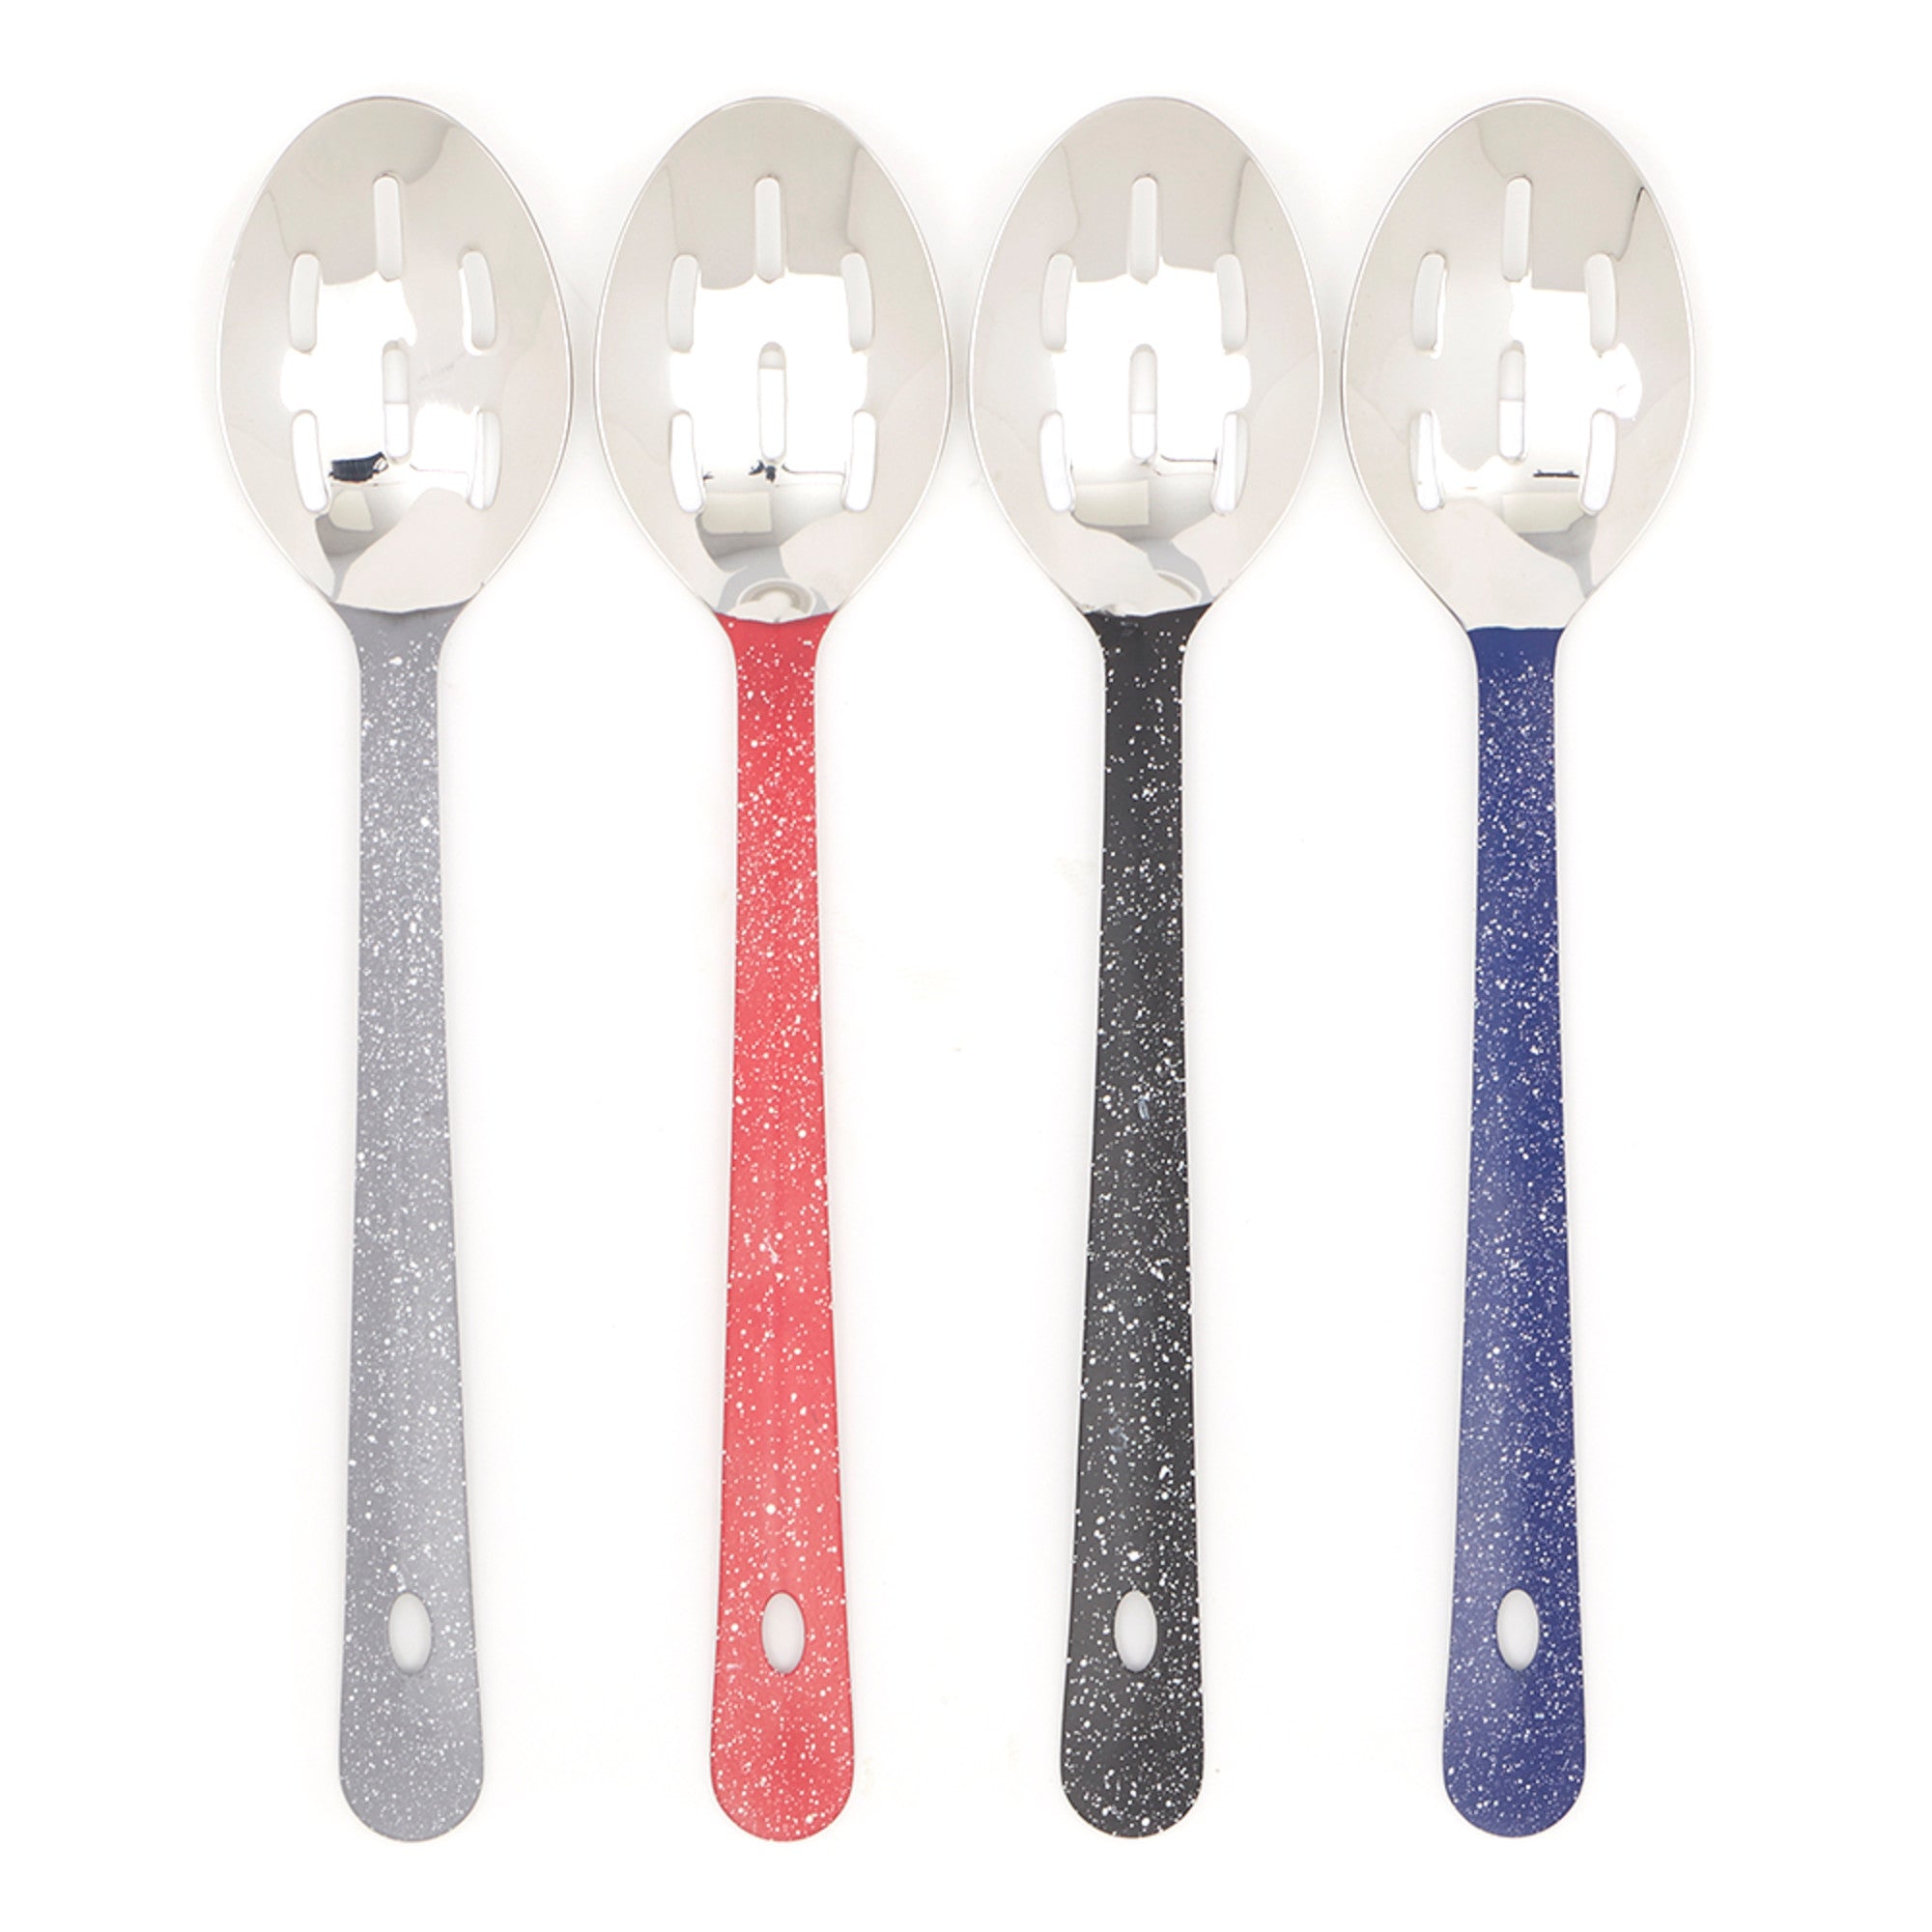 Home Basics Speckled Stainless Steel Slotted Spoon - Assorted Colors